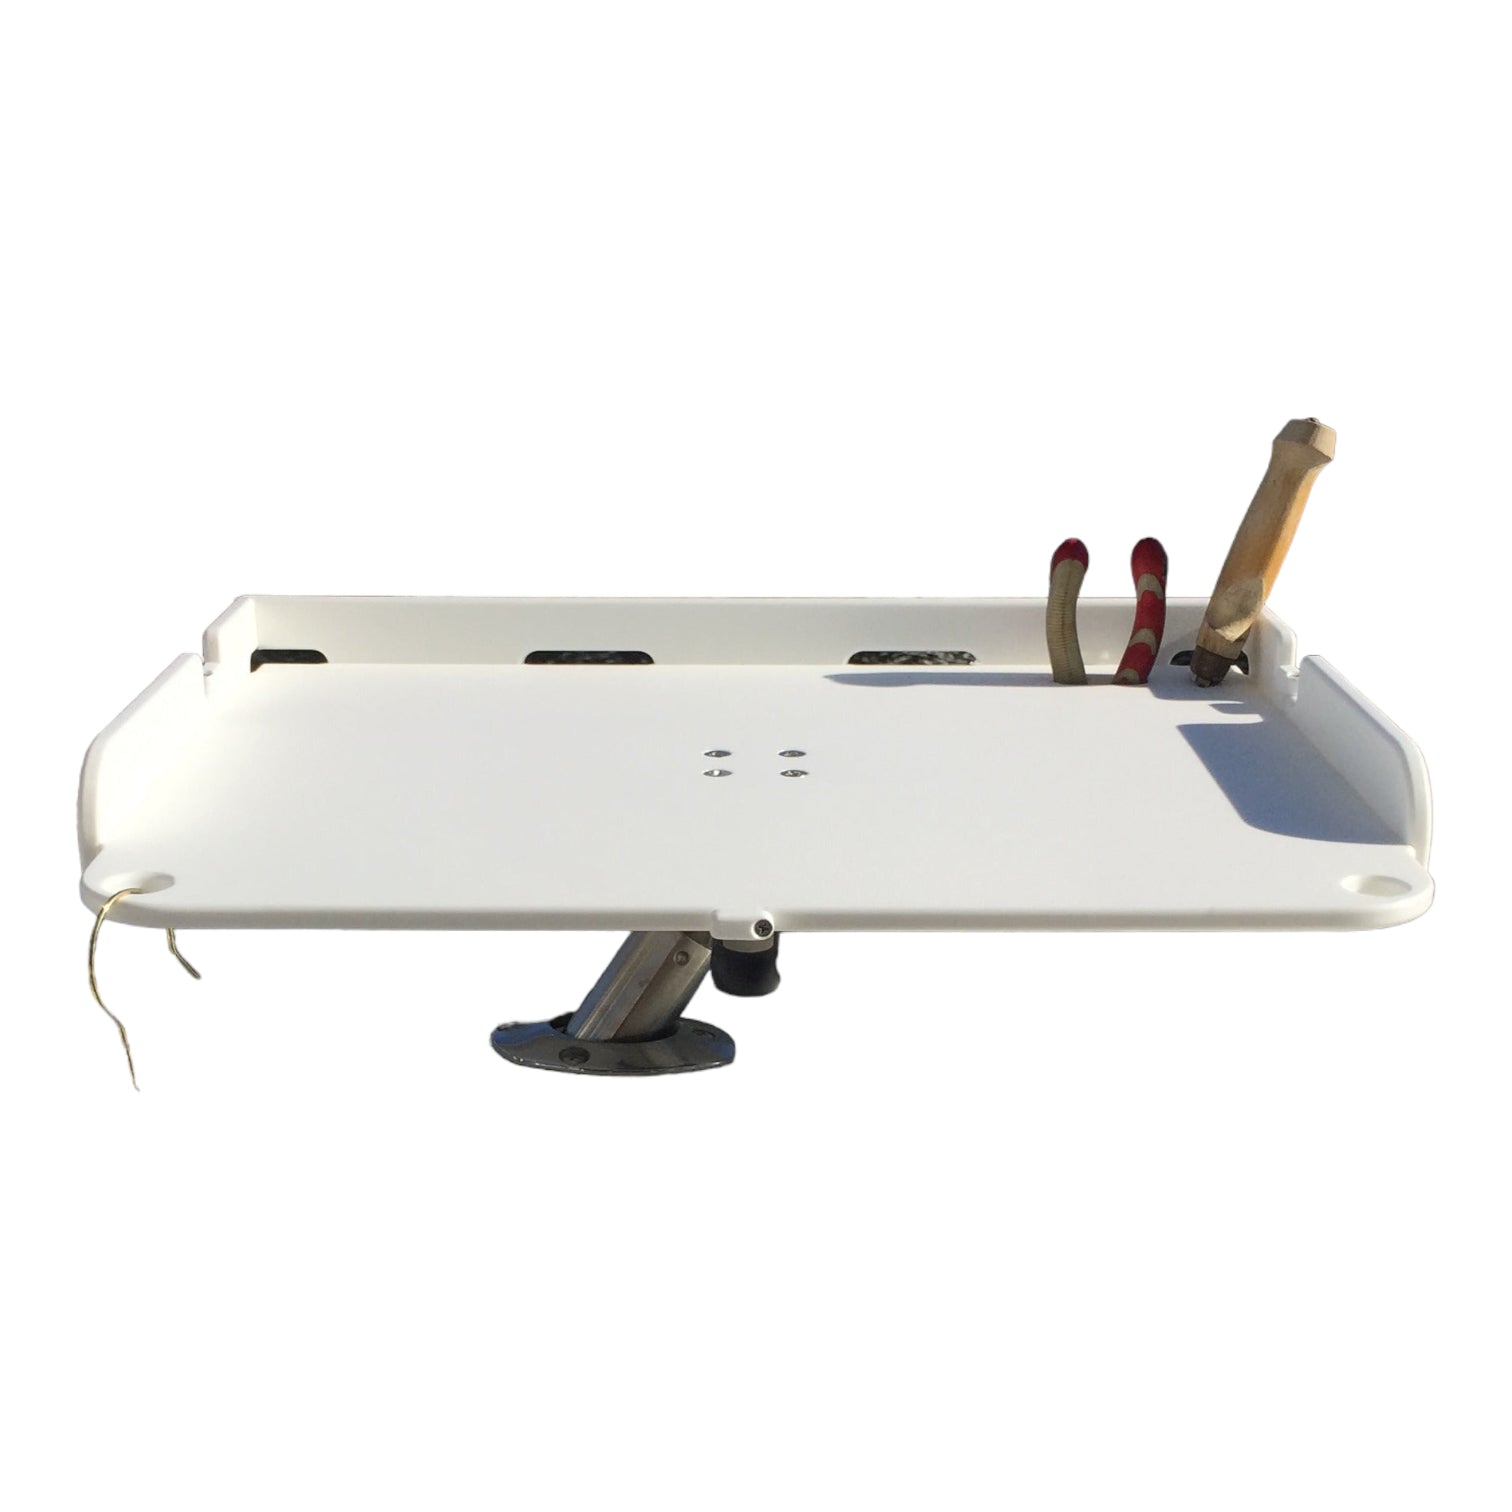 Docktail Fillet & Bait Table w/ Magma LeveLock - All Angle Adjustable Rod Holder Mount for Center Console, Pontoon, Sportfishing, Cruisers, Tenders